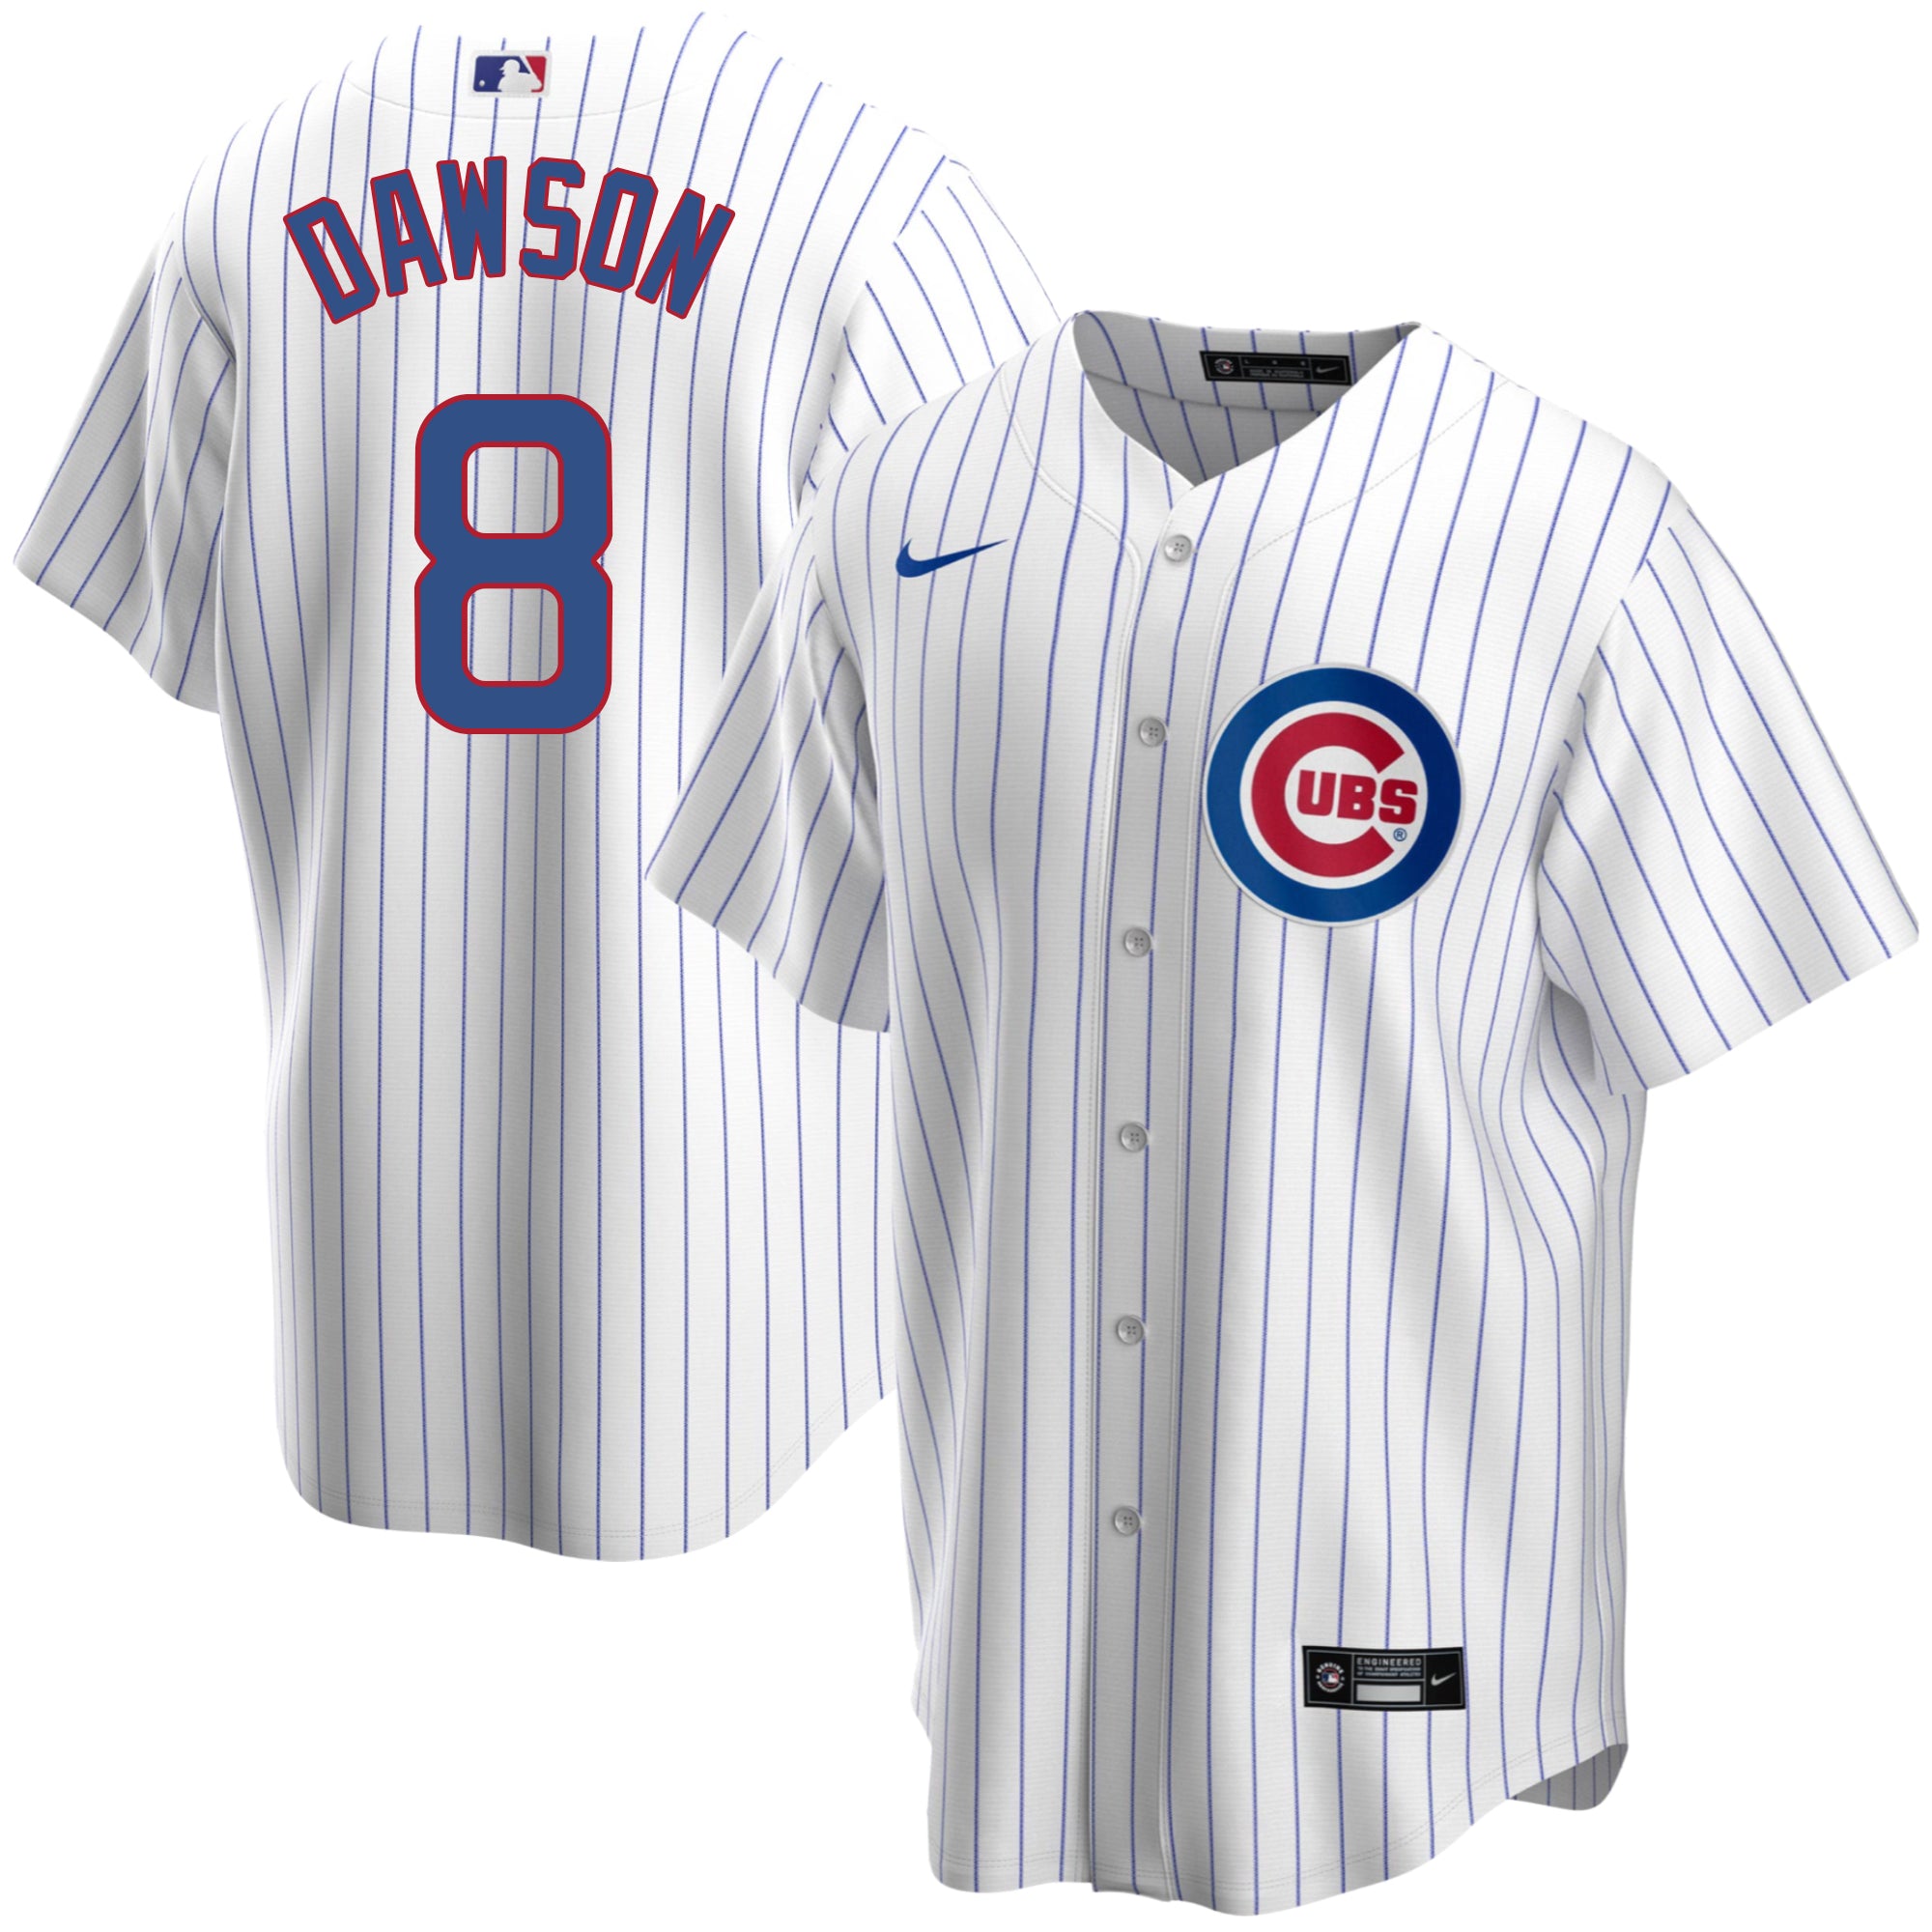 Andre Dawson Jersey - Chicago Cubs 1989 Home Vintage Throwback MLB Jersey